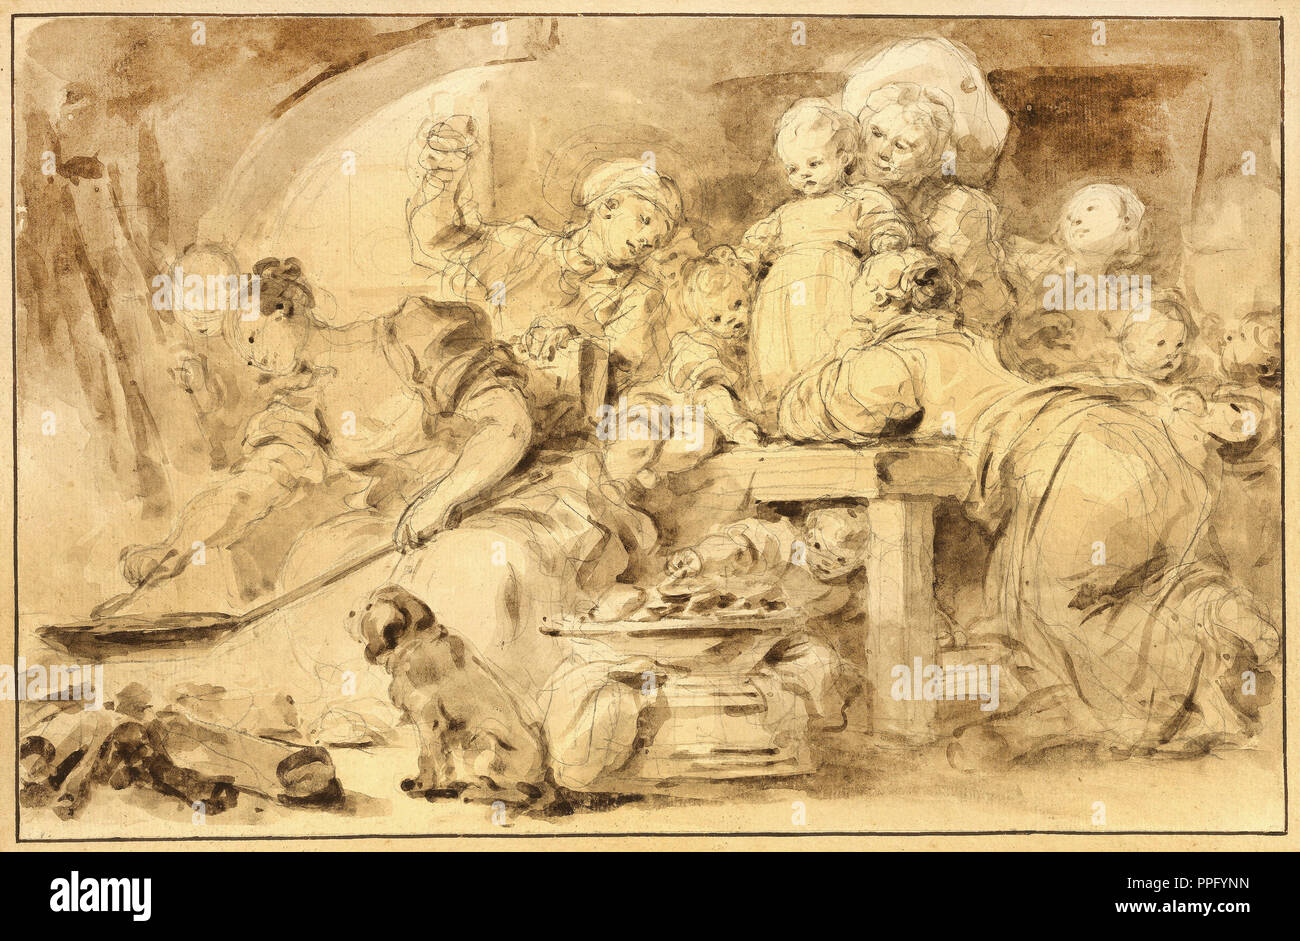 Jean-Honore Fragonard, The Pancake Maker. Circa 1782. Brush and brown ink over graphite. Getty Center, Los Angeles, USA. Stock Photo